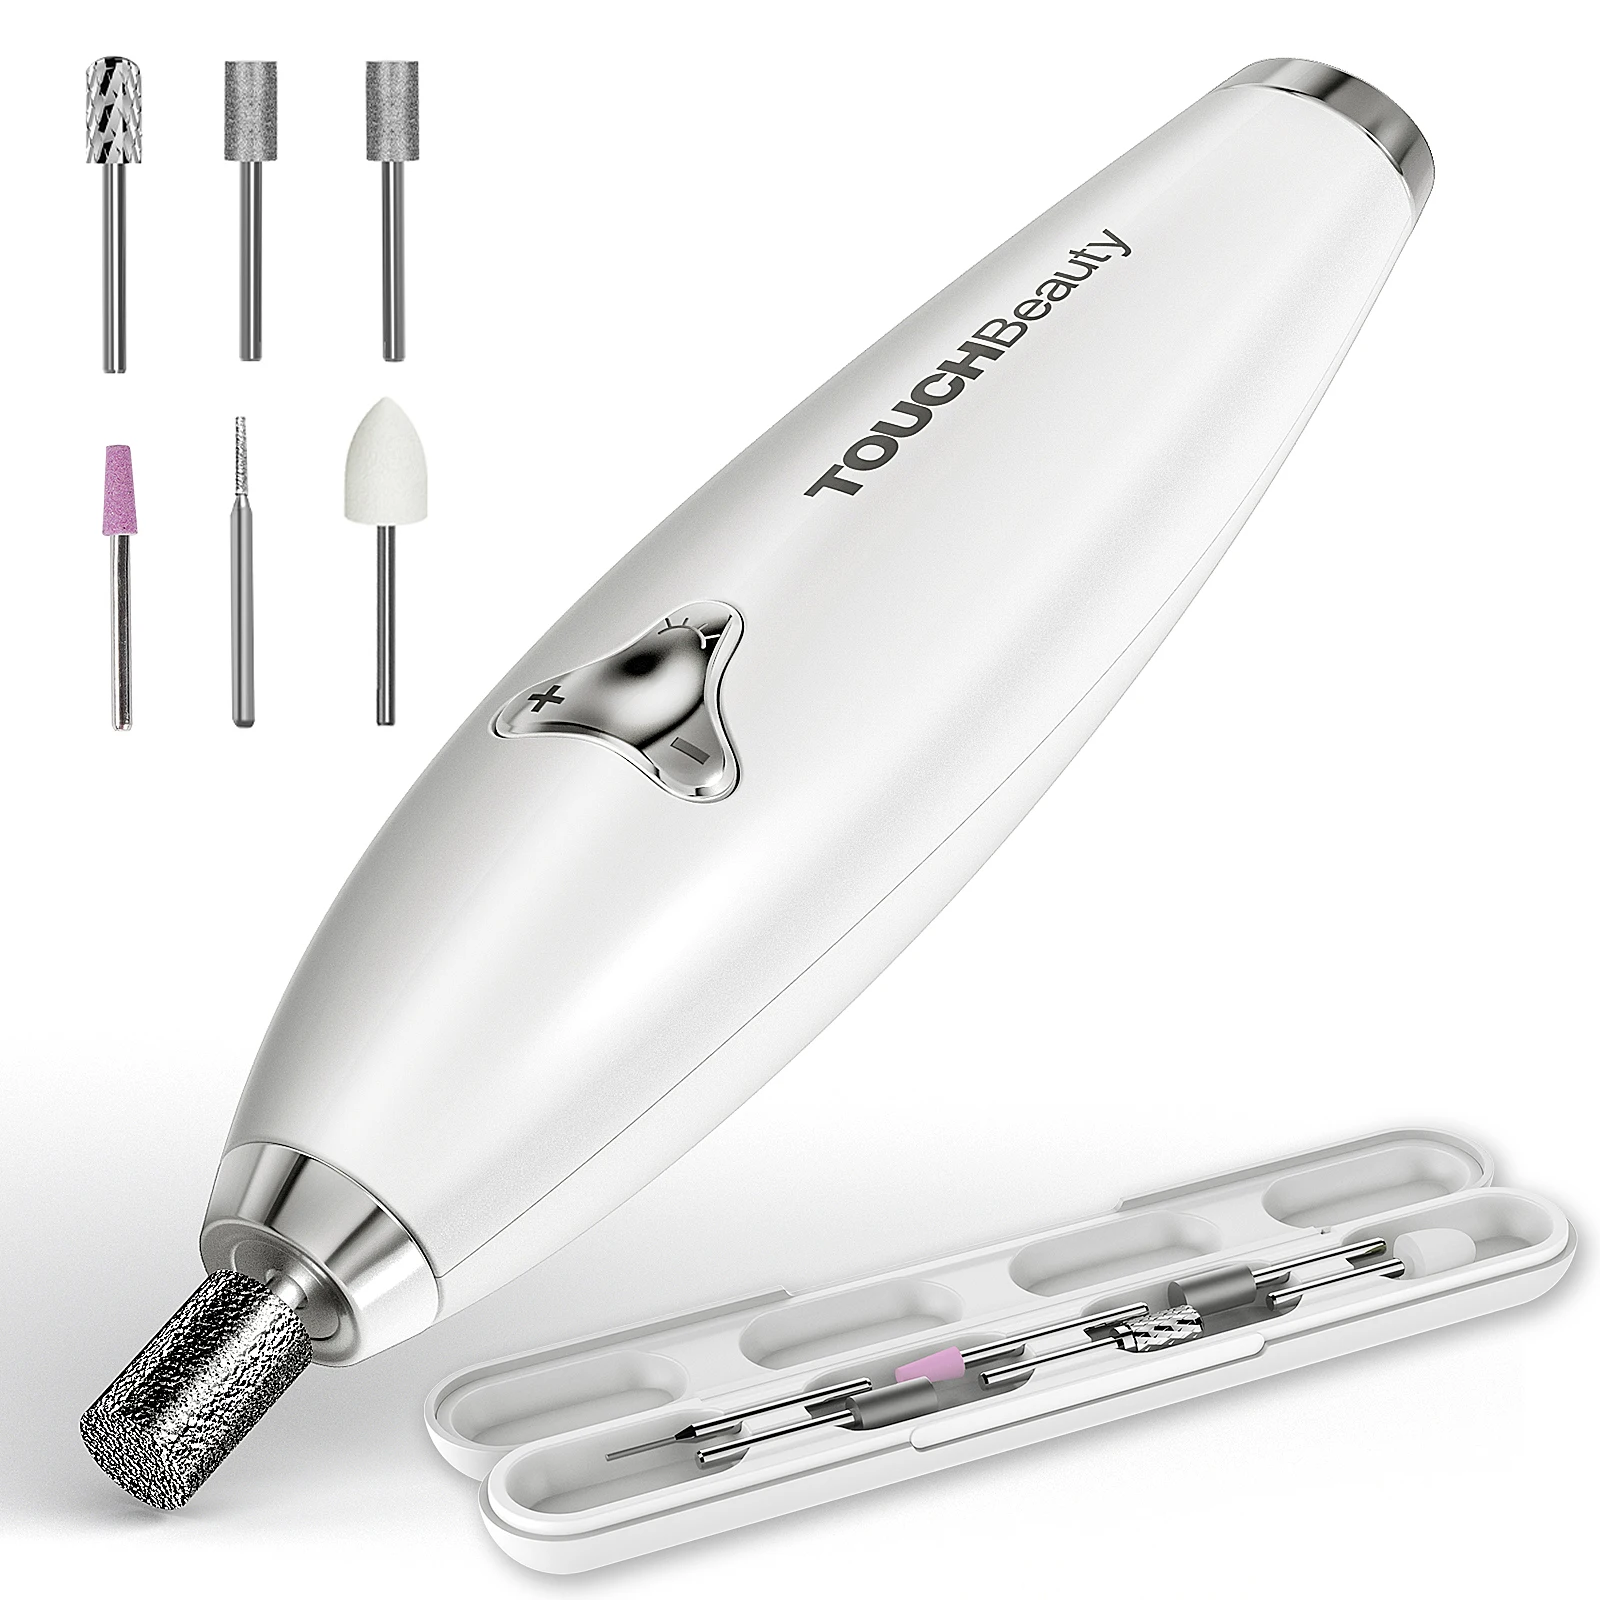 Bedreven Volwassen heb vertrouwen Touchbeauty Best Selling In Amazon 6 In 1 Electric Manicure Pedicure Set  Professional Nail Drill Kit Home Nail Art Beauty Device - Buy Electric  Manicure Pedicure Set,Nail Drill Kit,Nail Art Beauty Product